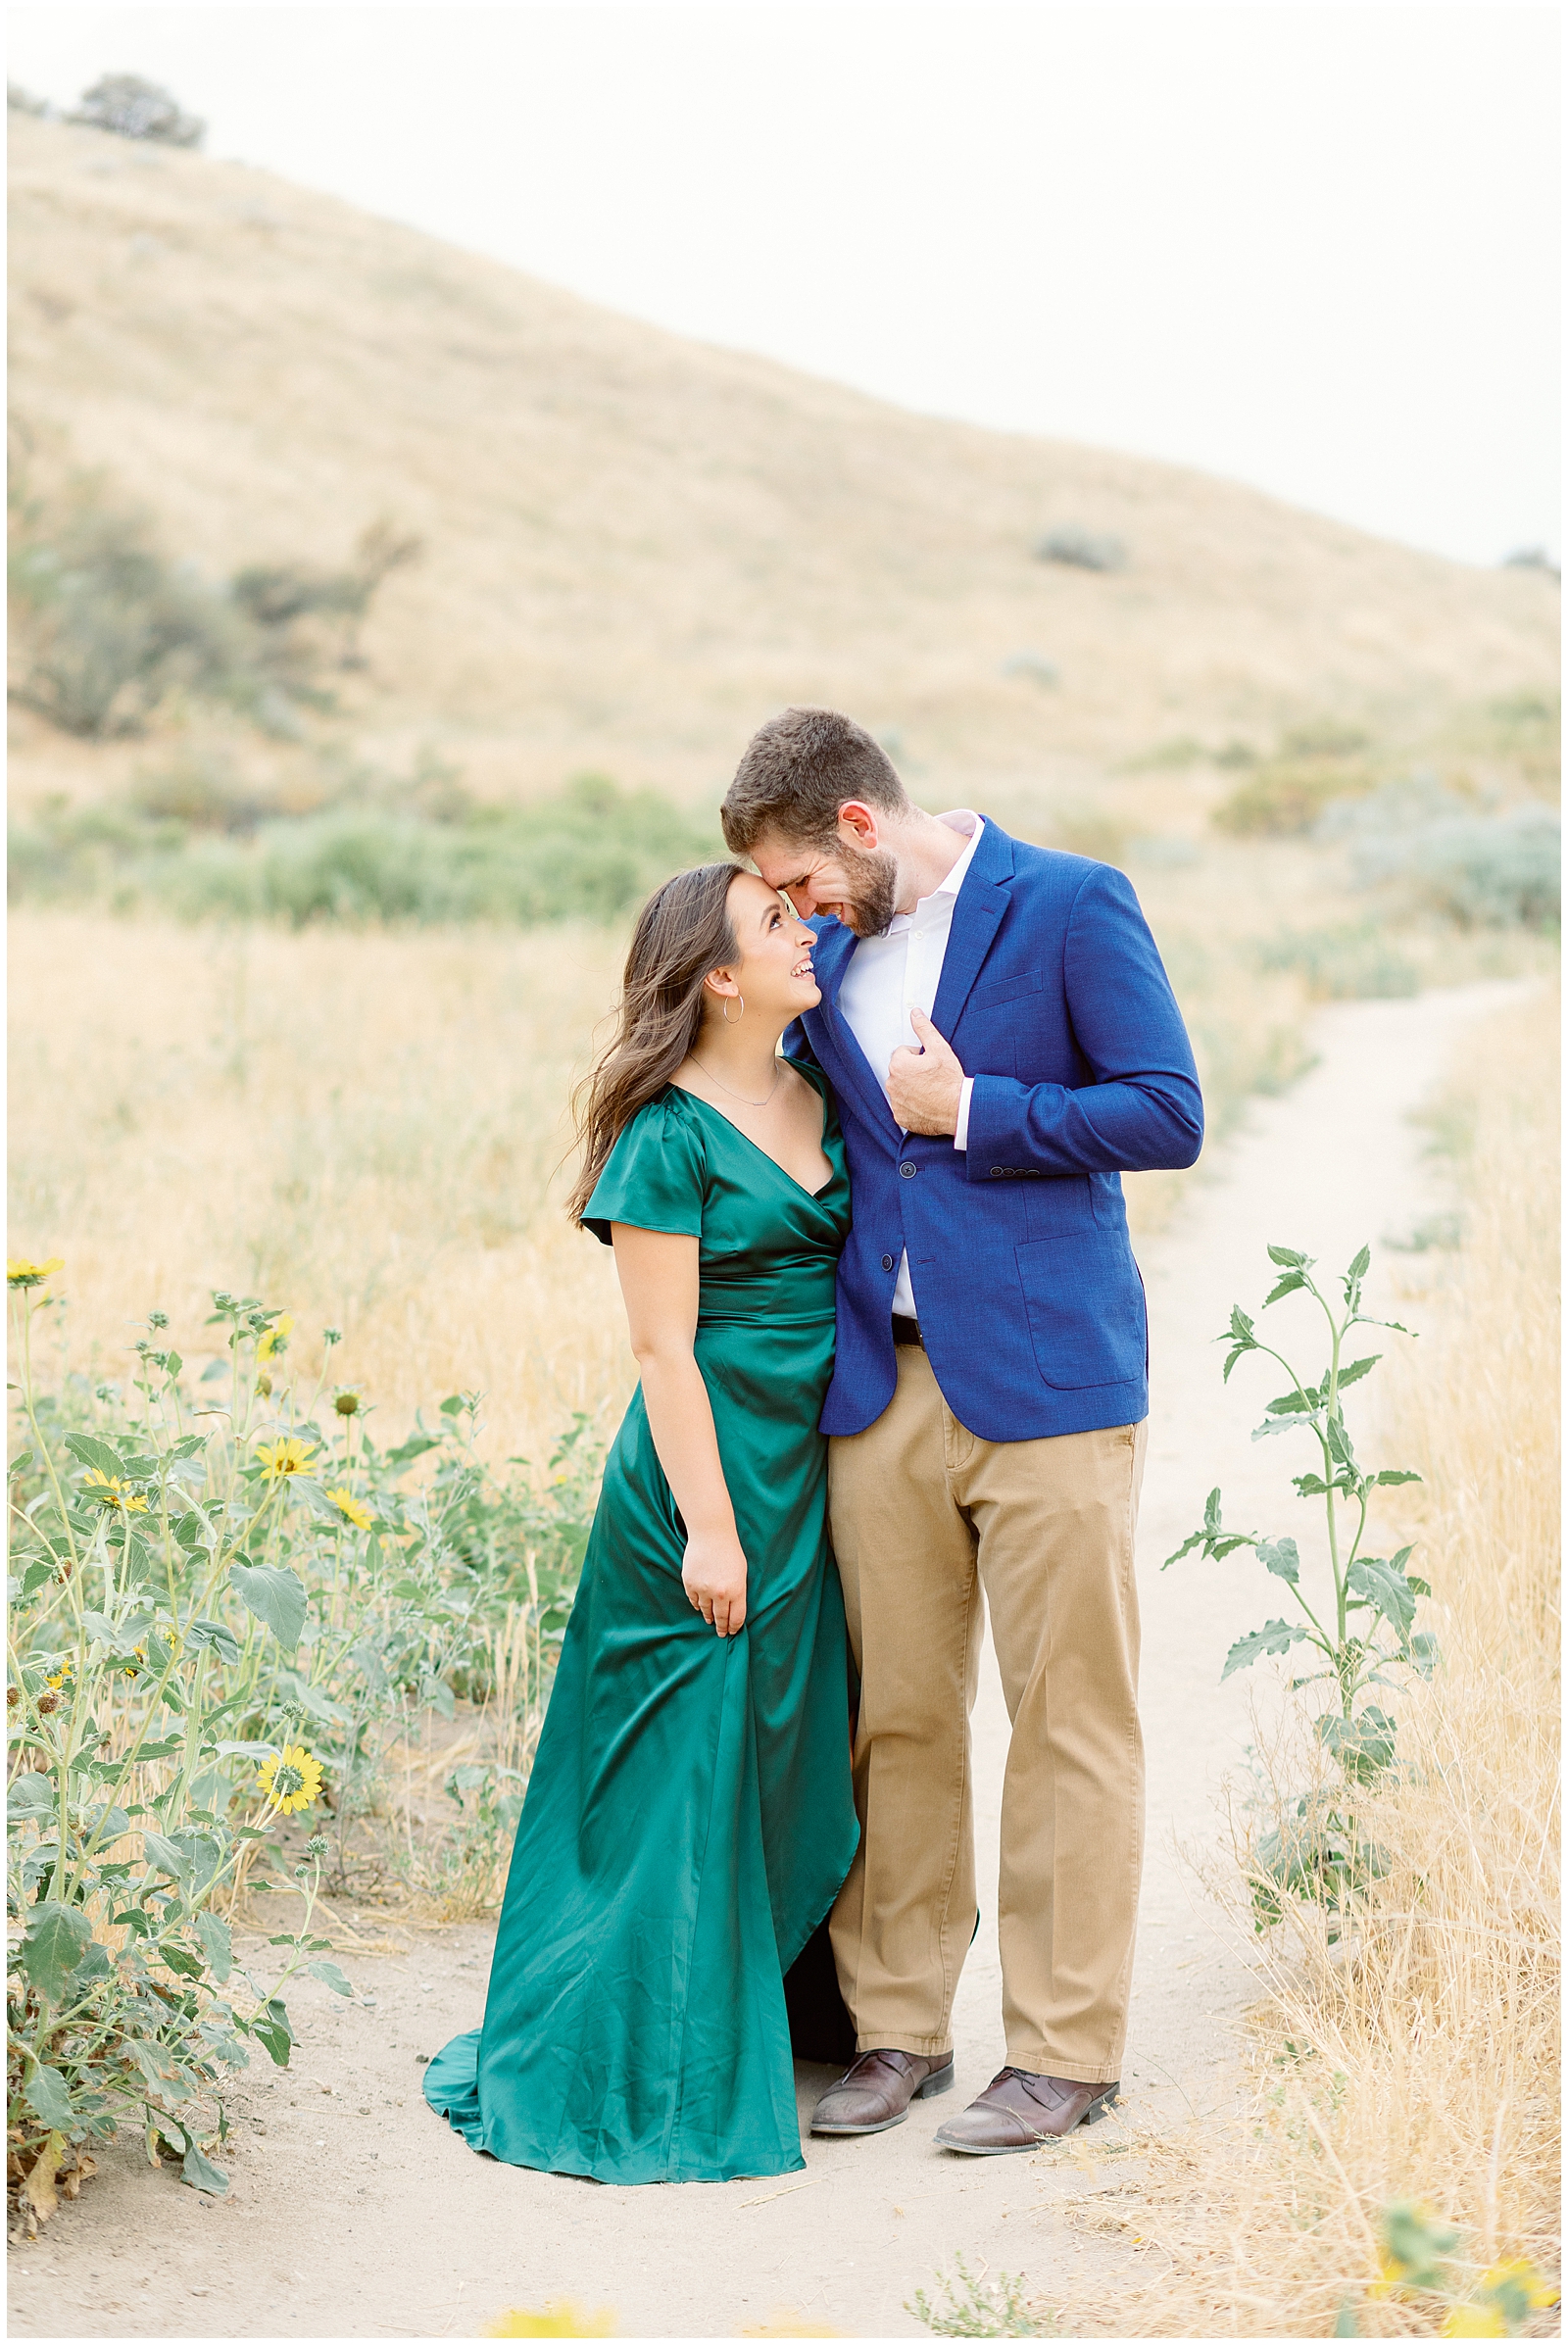 Romantic Summer Foothills Engagement Session in Boise Idaho